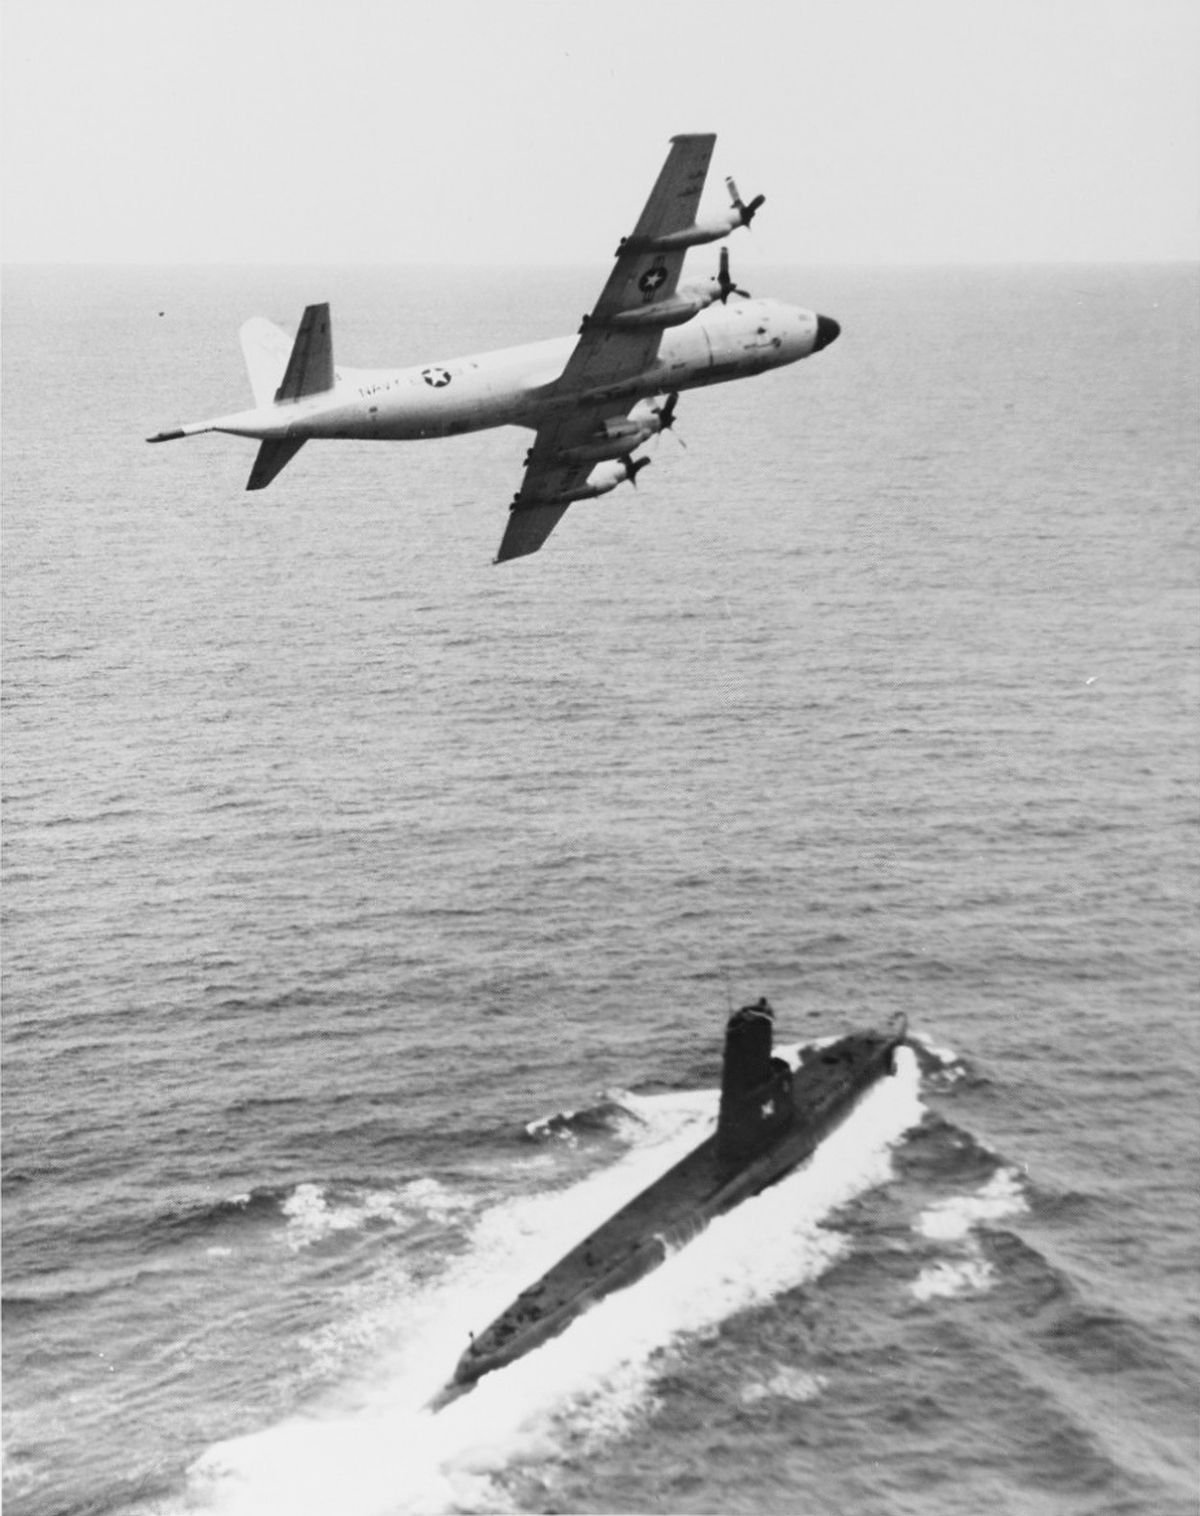 A low-flying aircraft, with 4 propellers and the Navy white star insignia on its side and wing, tracks a dark submarine emerging from the ocean waves.